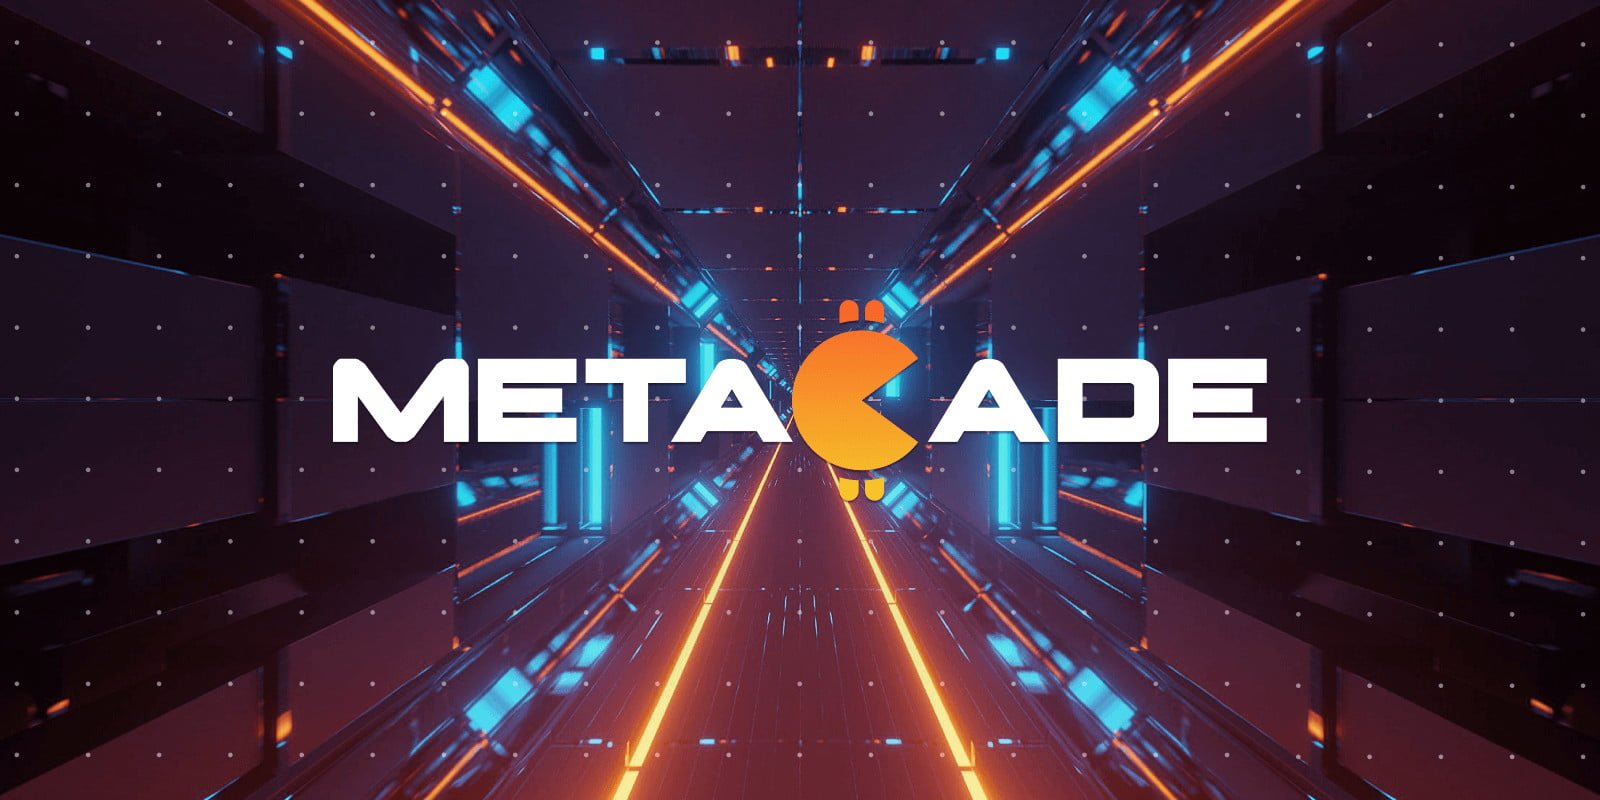 Metacade Presale for Web3’s First-Ever P2E Crypto Arcade Raises Over $670k in Under 2 Weeks 4